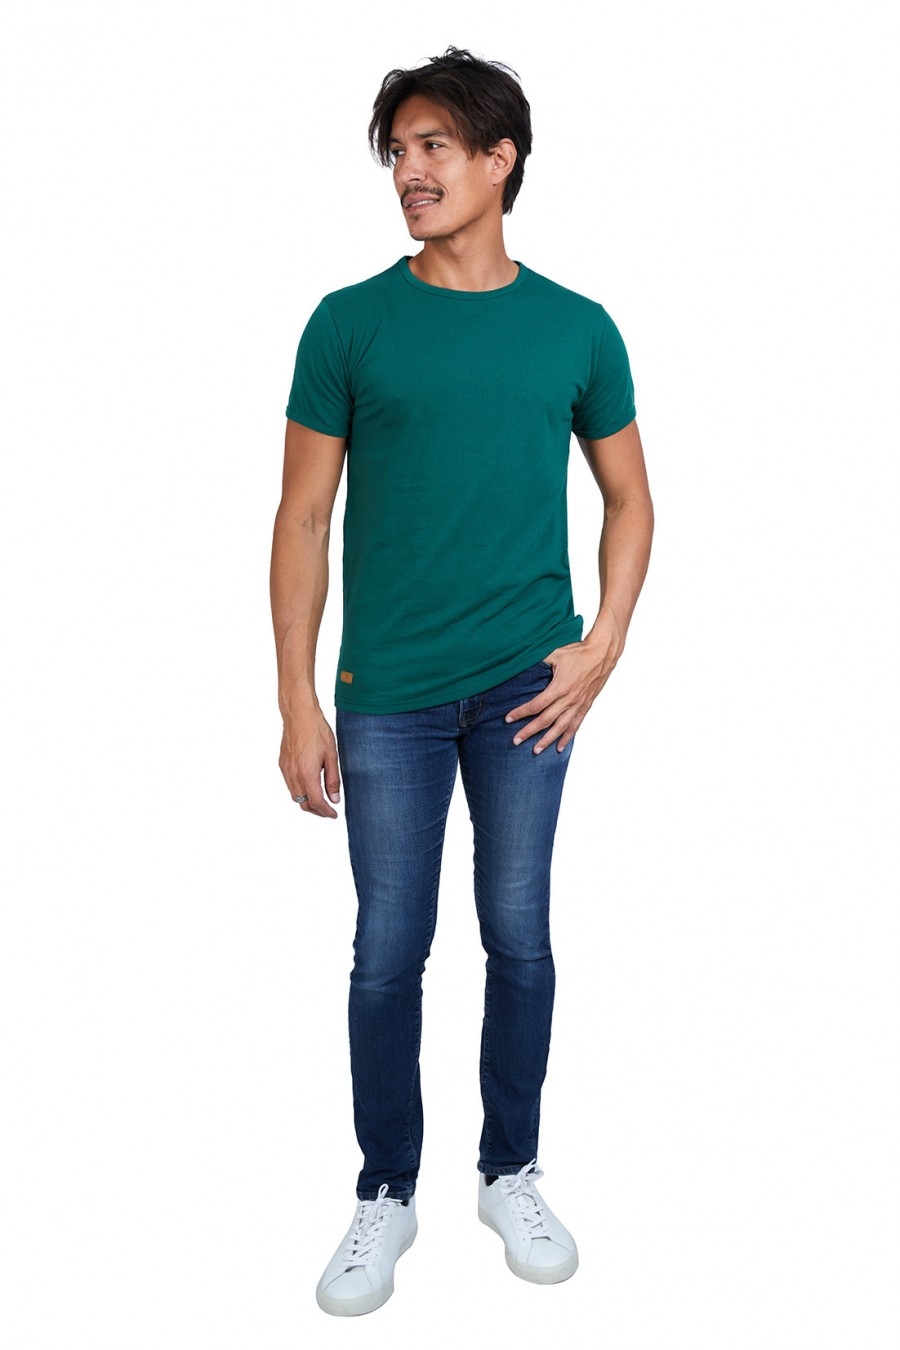 T-SHIRT HOMME MANCHE COURTE COL ROND VERT BOUTEILLE - Made in France & 100% Recyclé